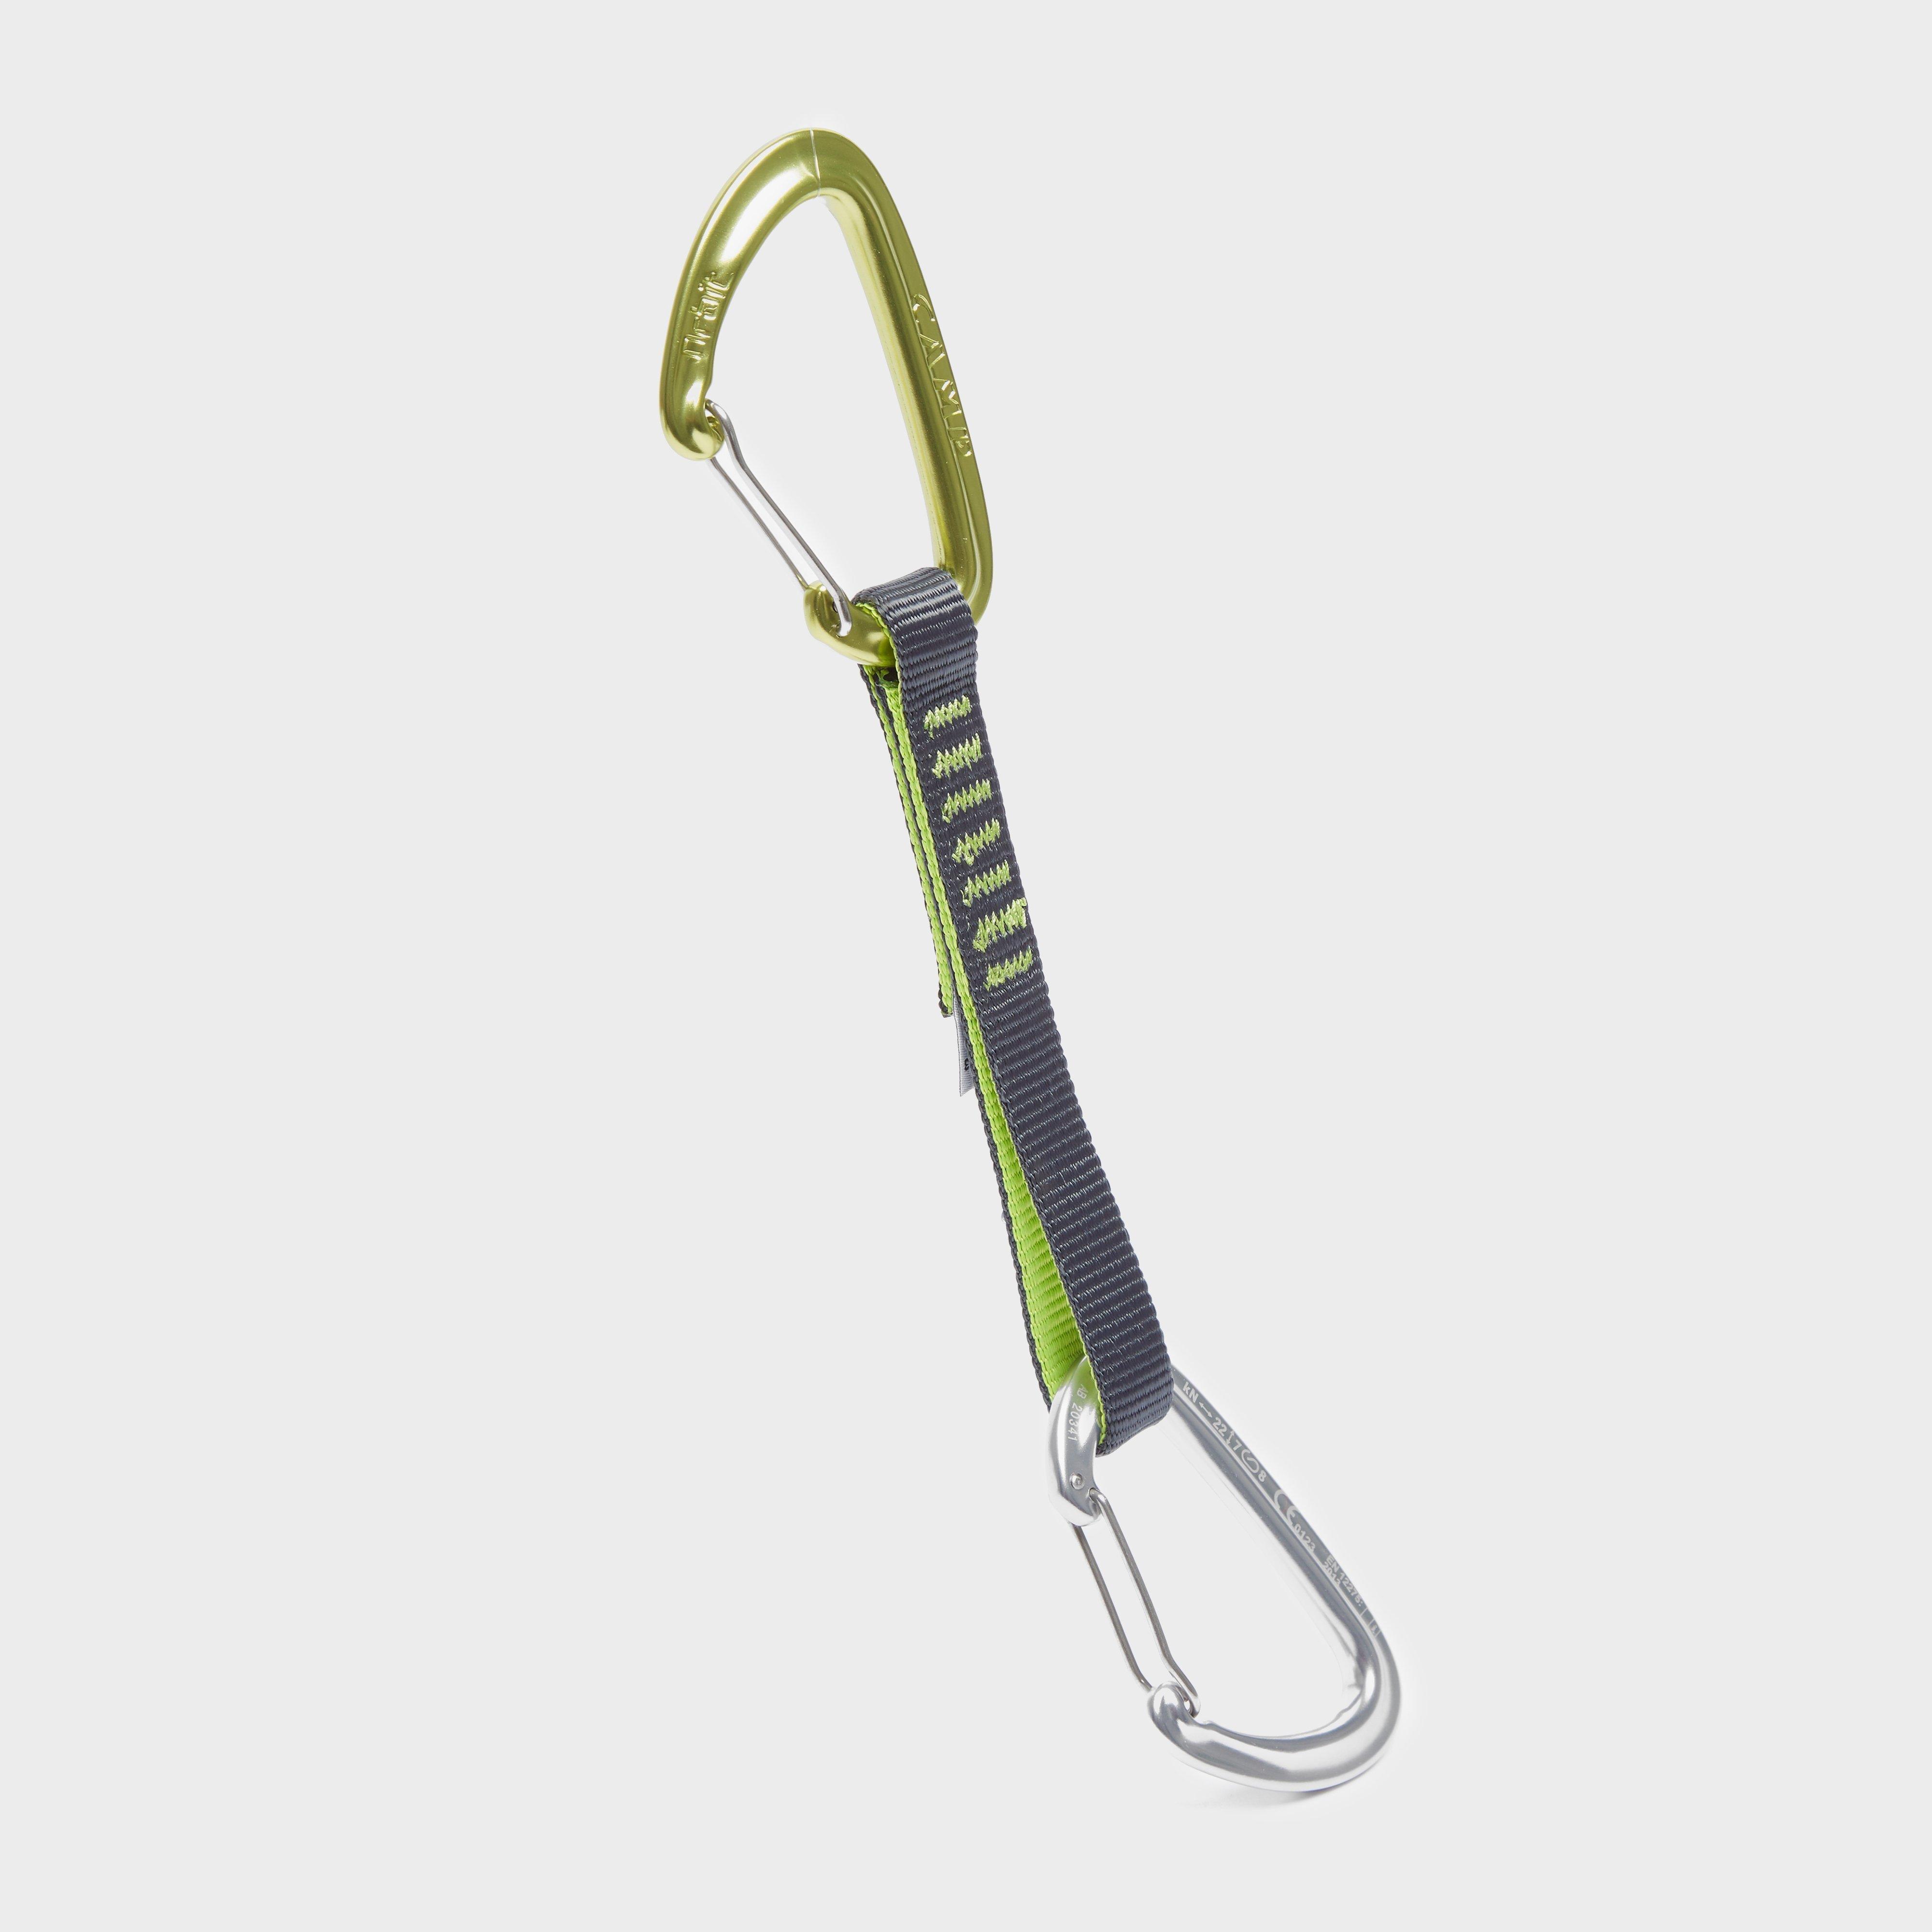 Camp Orbit Express Wire Quickdraw Carabiners - Green/green  Green/green